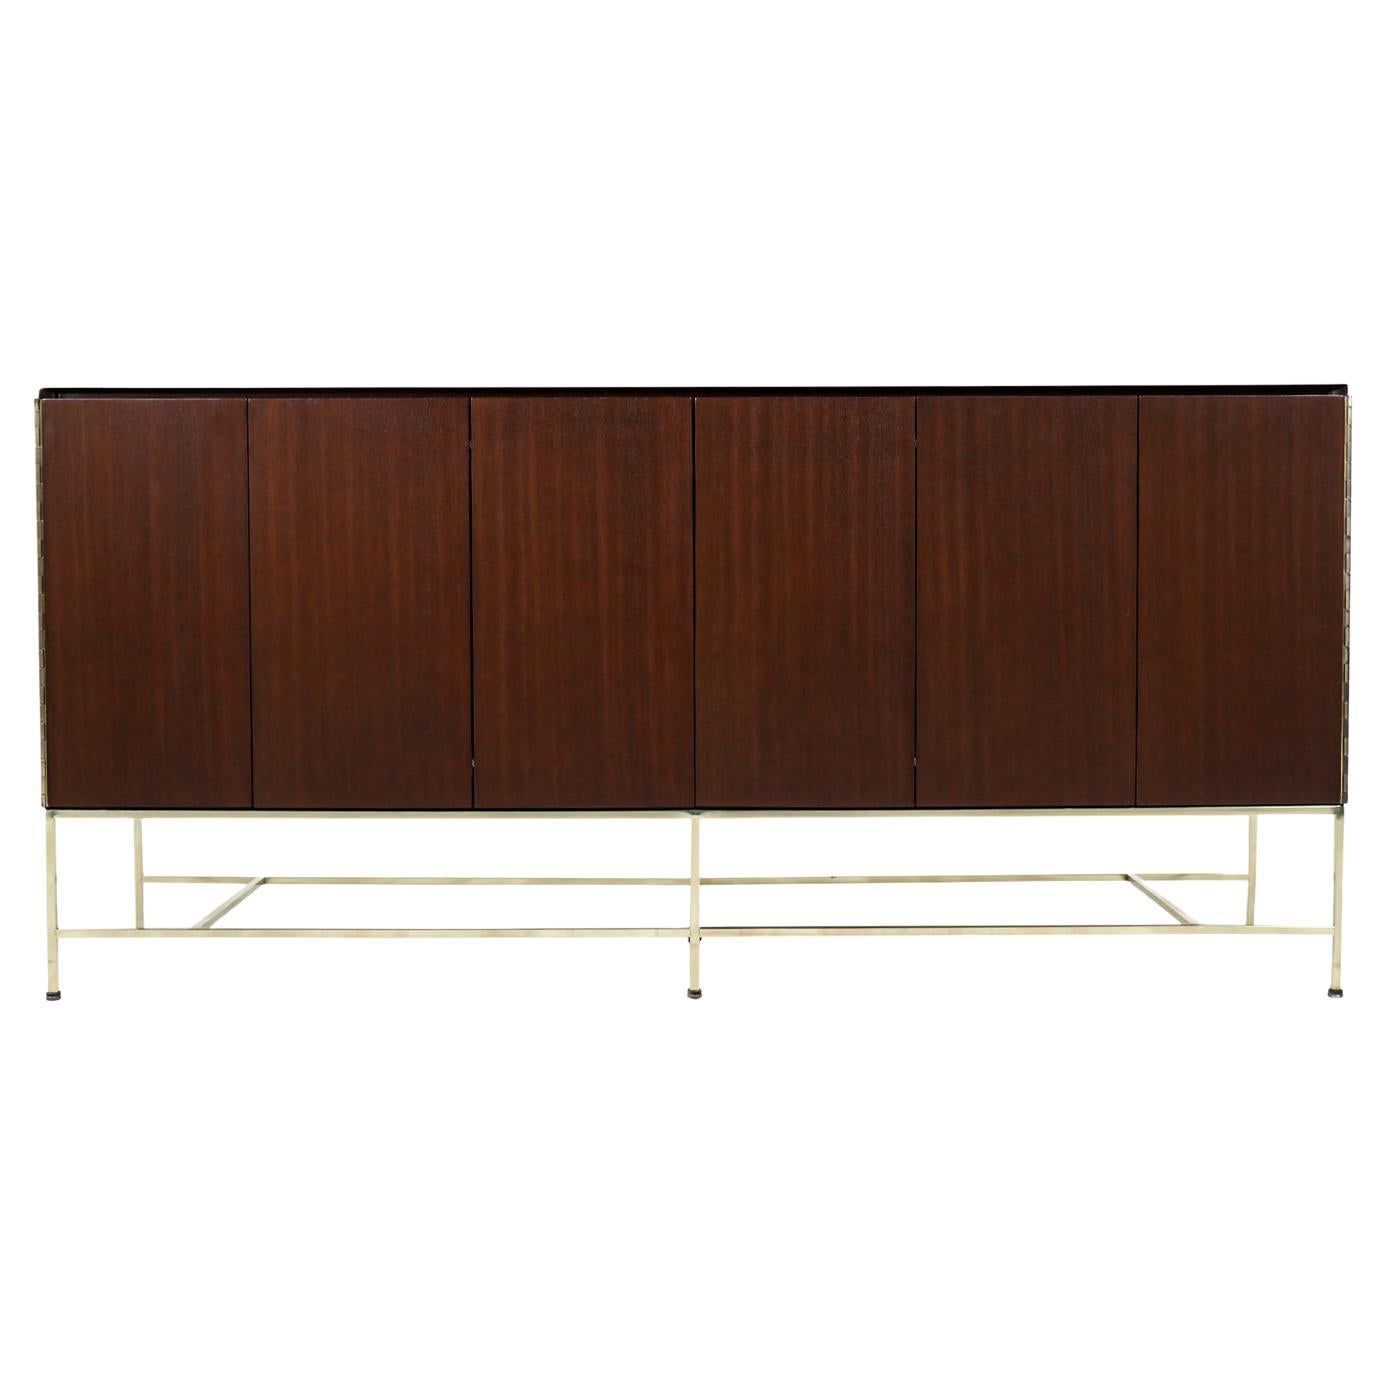 Paul McCobb "Irwin Collection" Credenza with Travertine Stone Top & Brass Accent